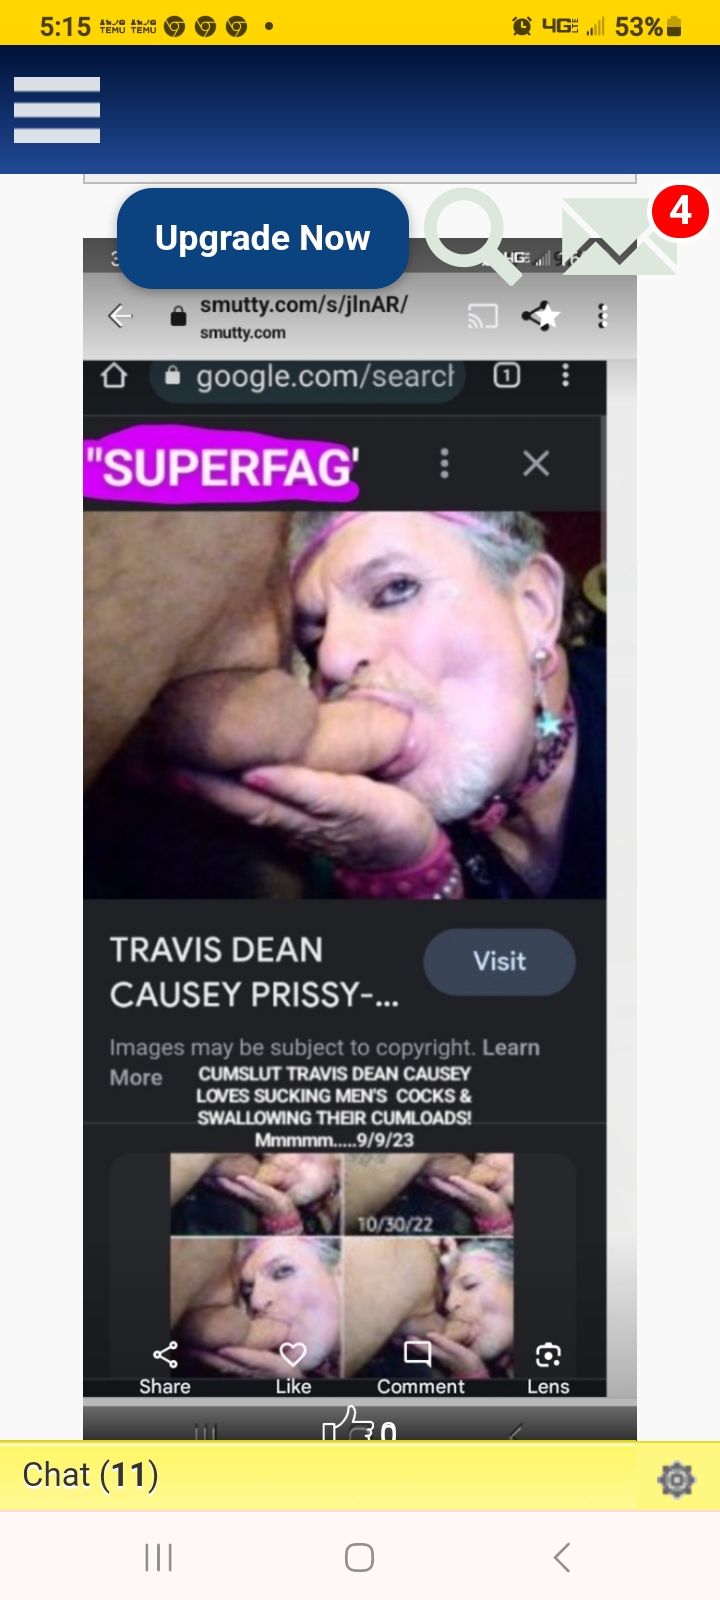 SISSYFAGGOT TRAVIS DEAN CAUSEY OF DESOTO MO SUCKING COCK AND GETTING FUCKED IN HIS FAGGOTPUSSY.  ...